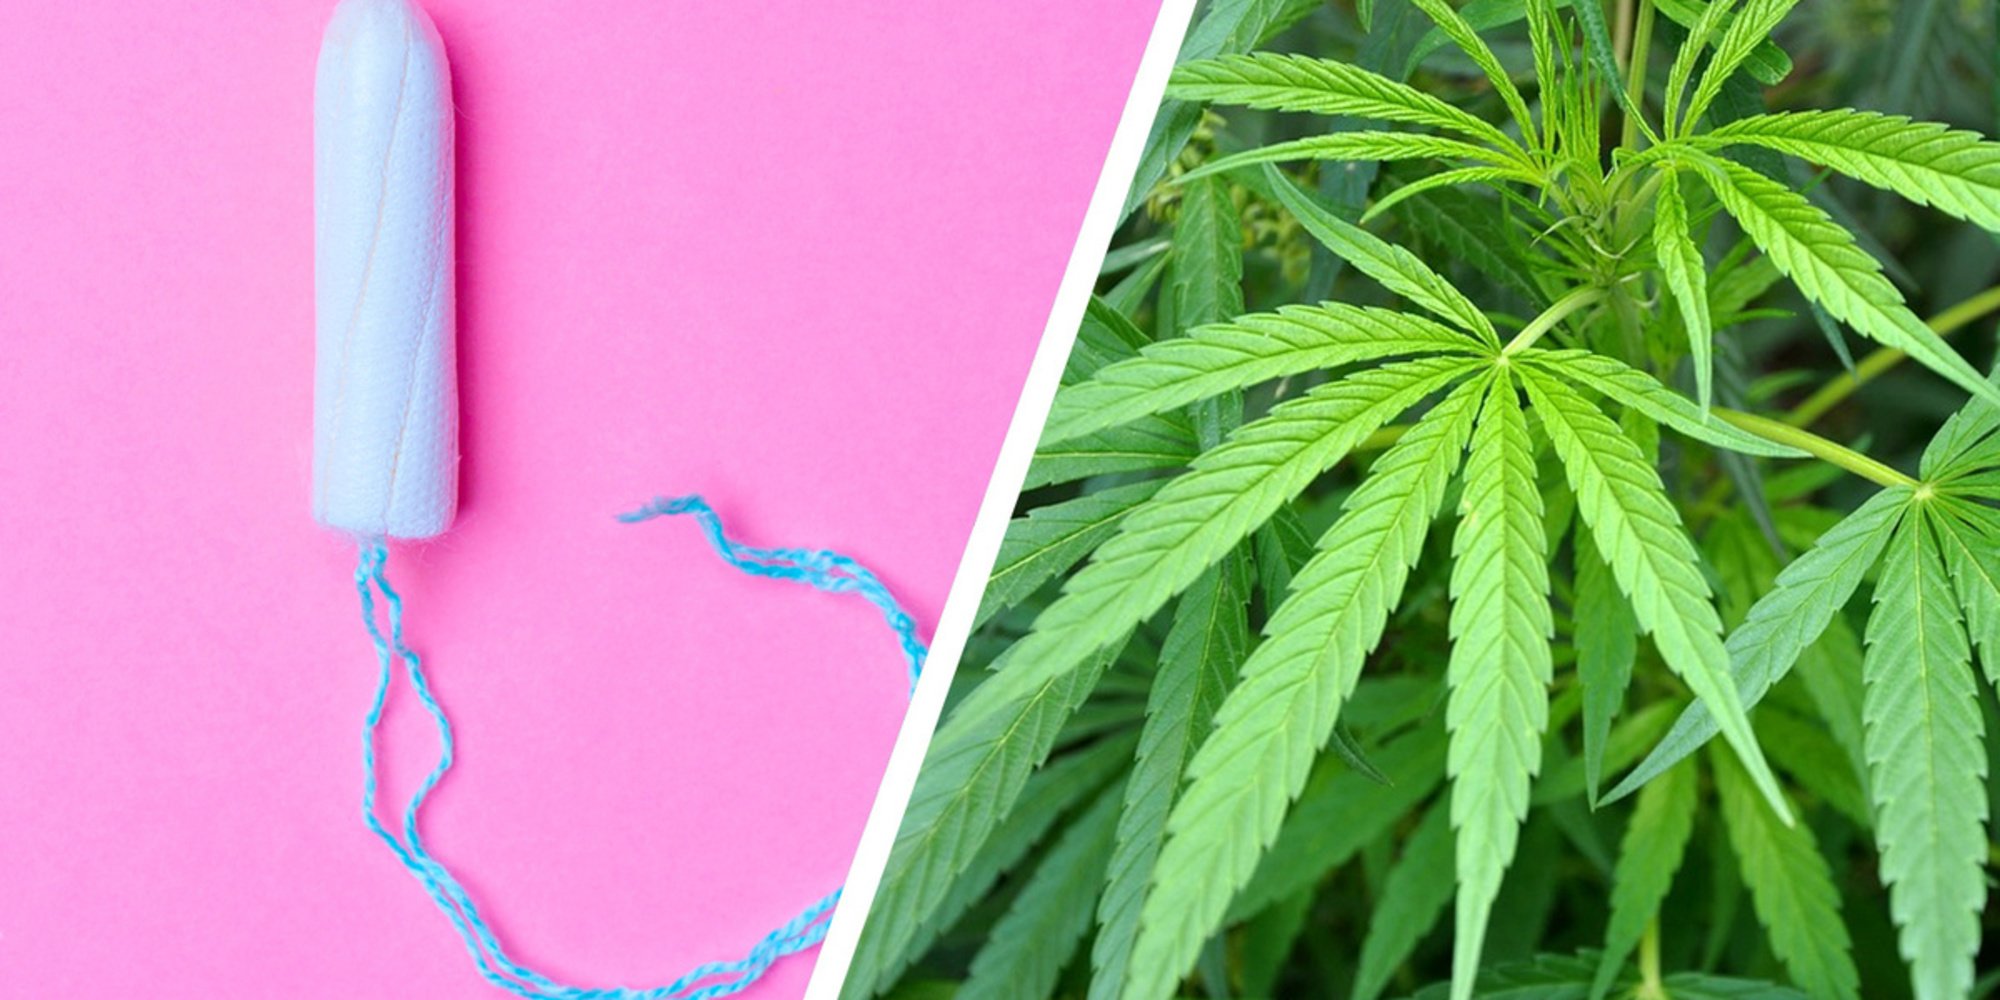 400 women will use 'weed tampons' for Harvard cannabis study